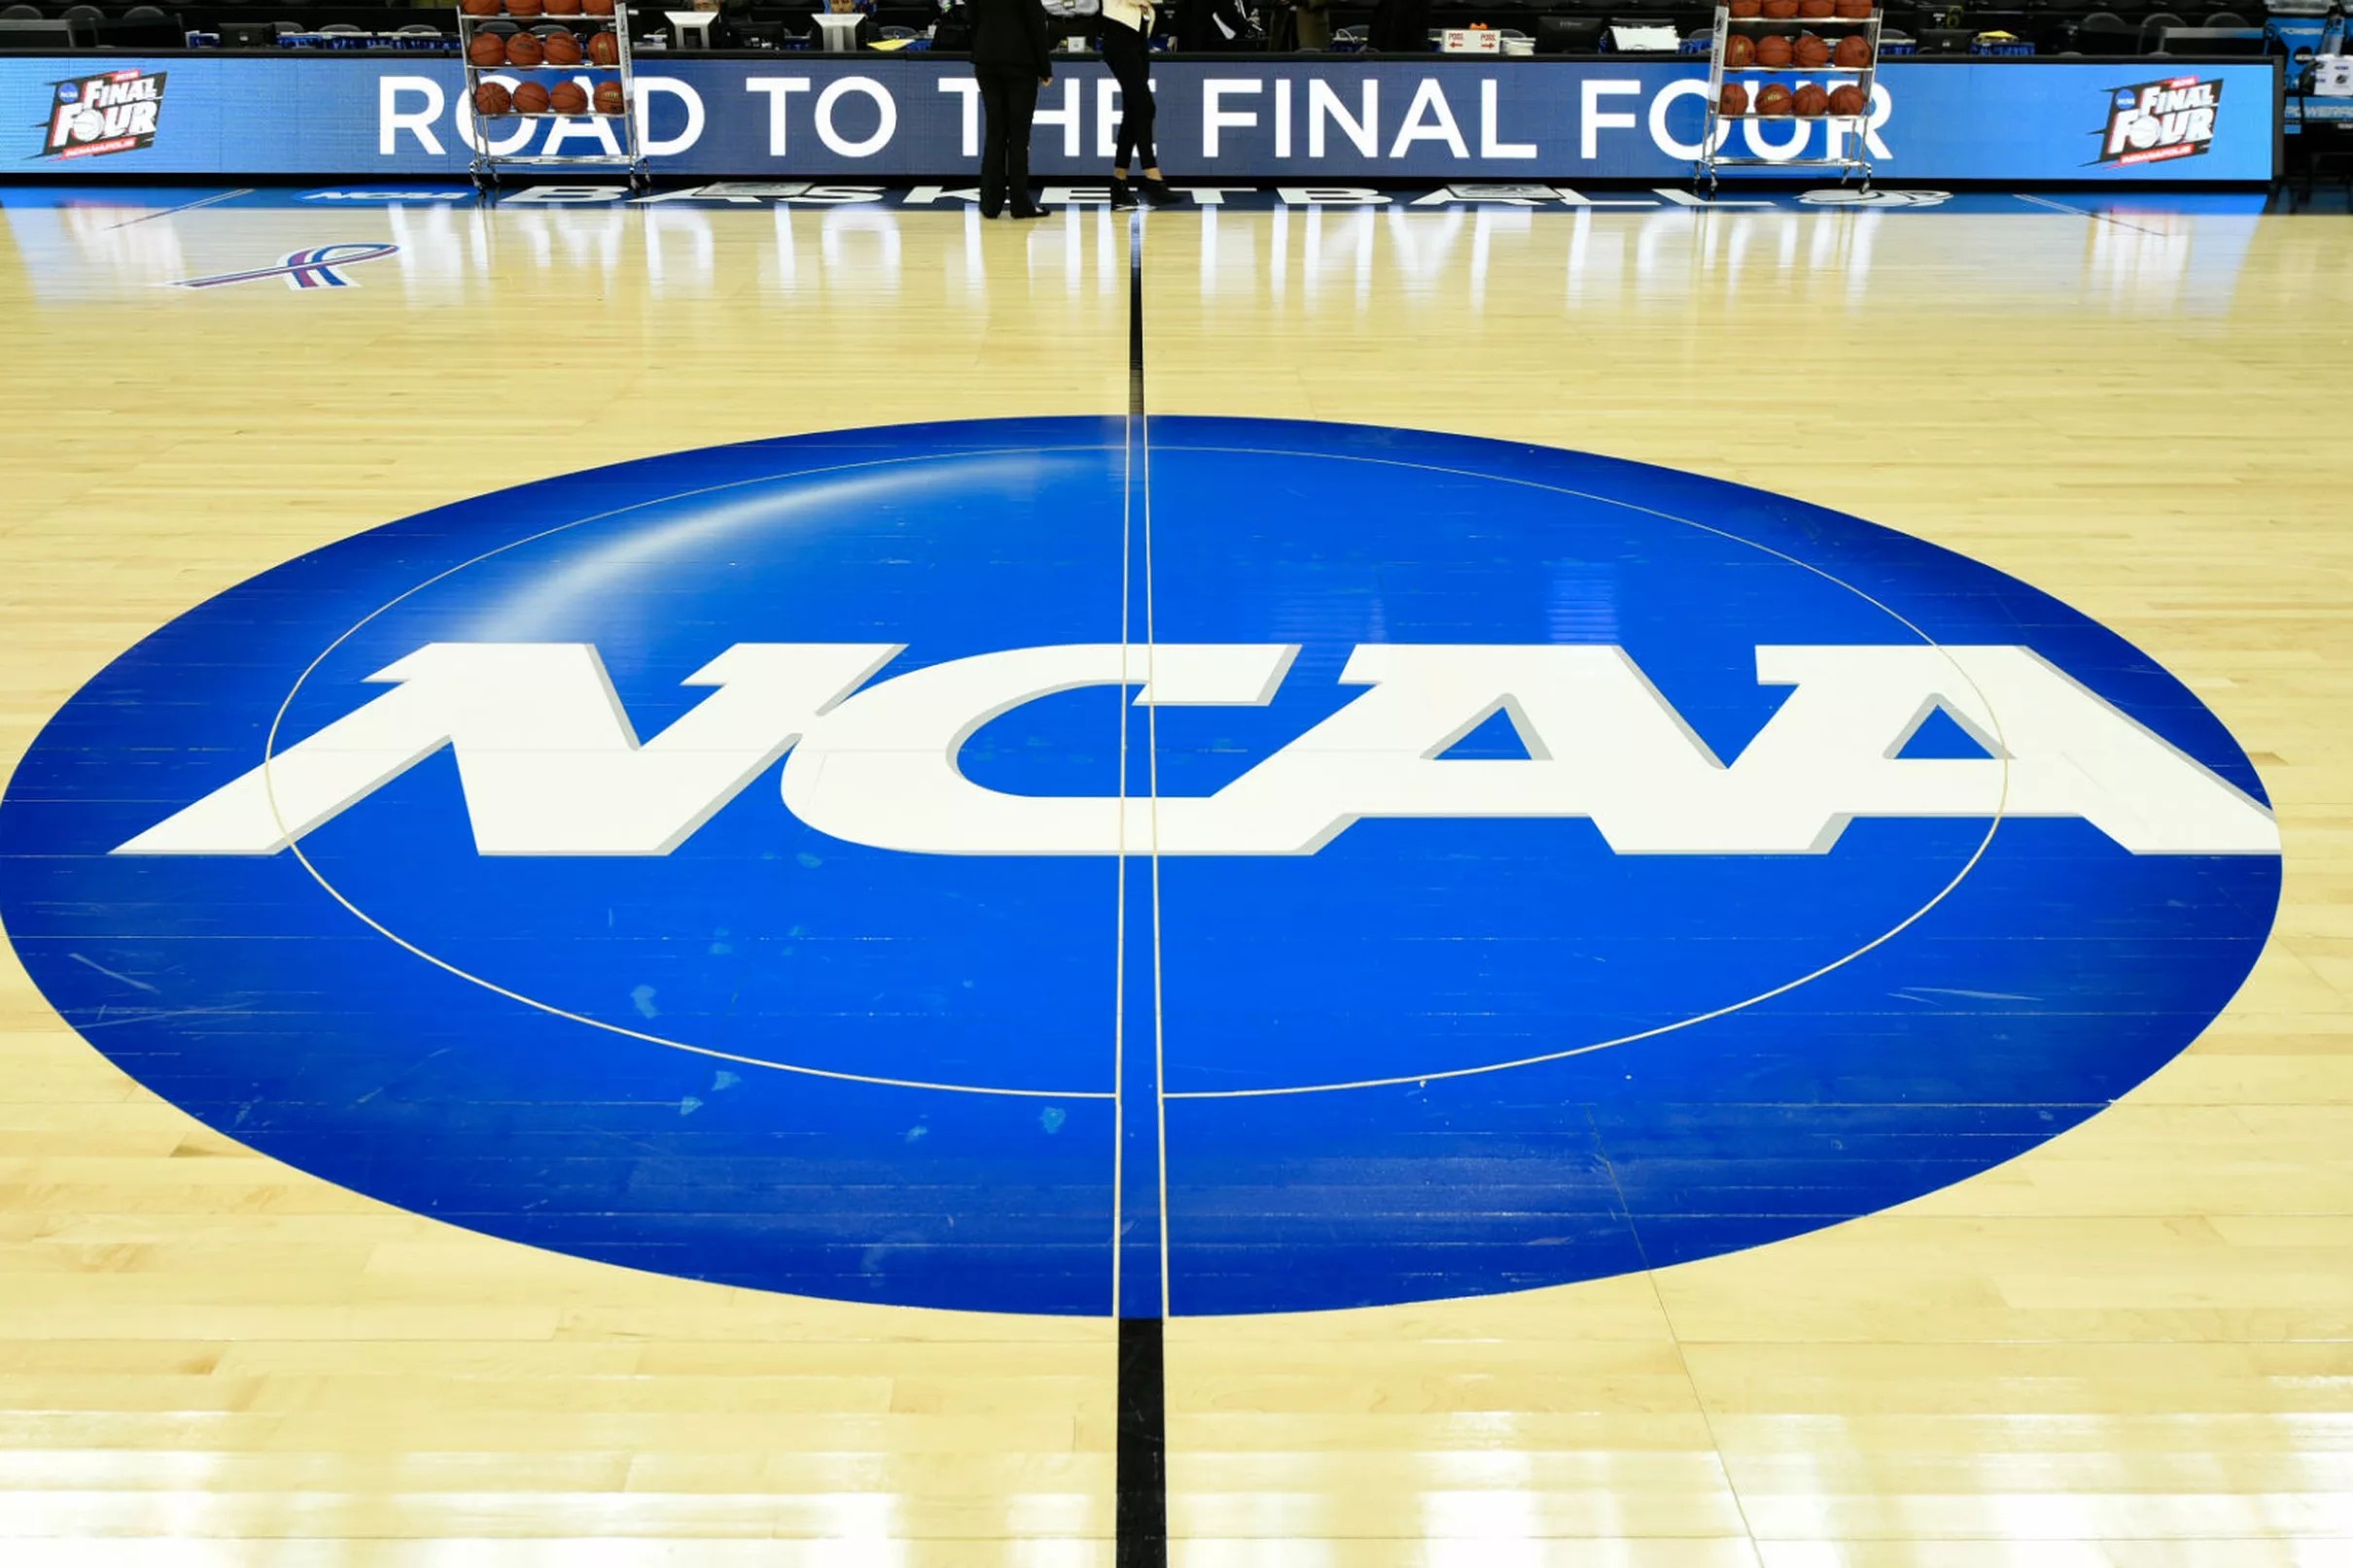 NCAA live recruiting periods and open gyms unlikely in September